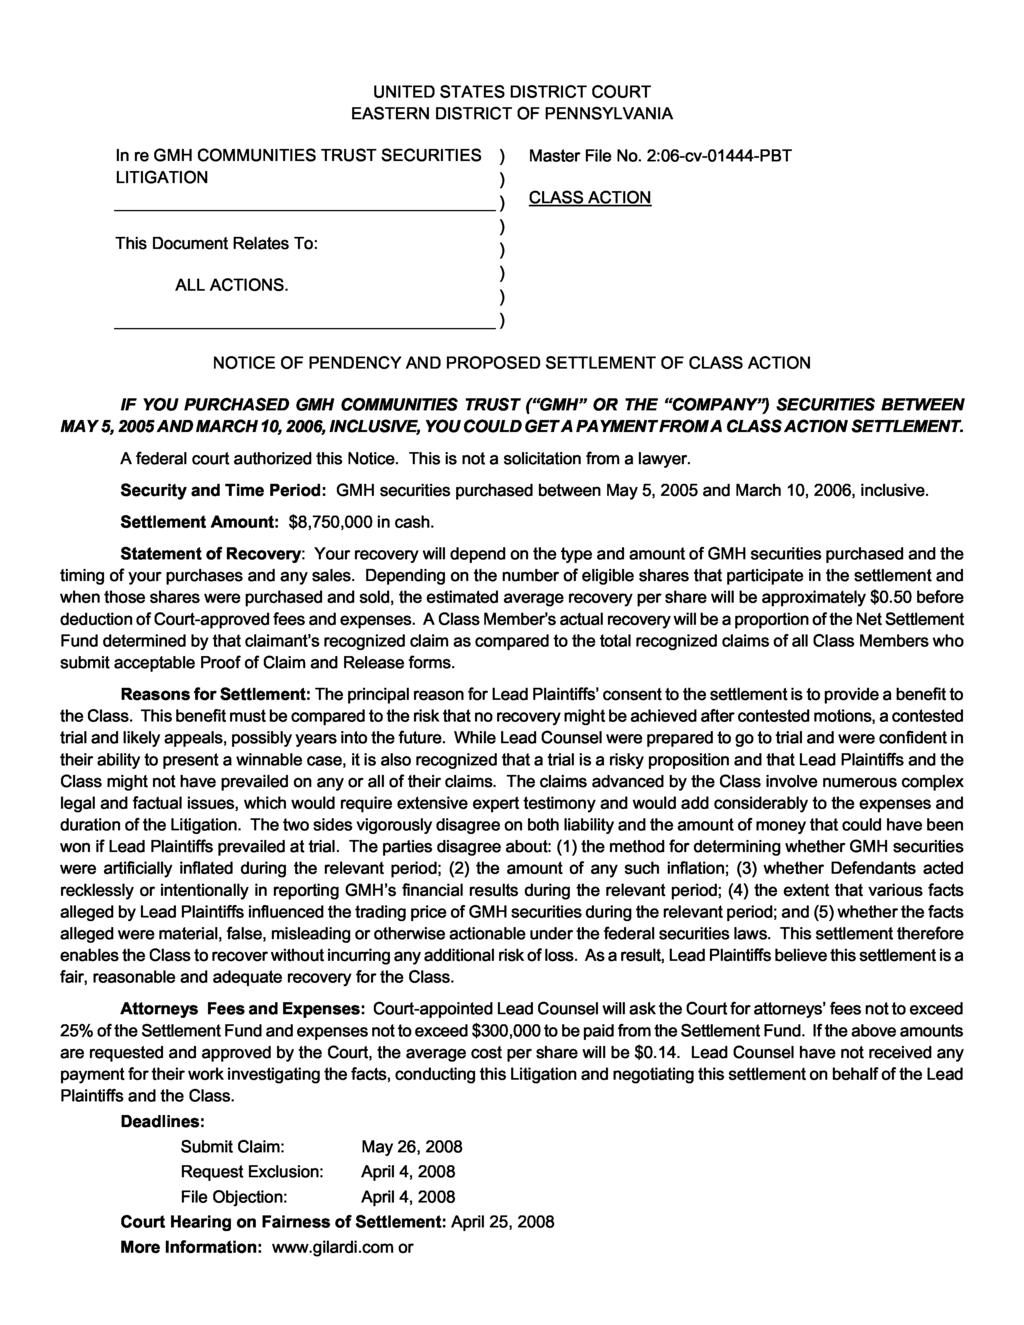 UNITED STATES DISTRICT COURT EASTERN DISTRICT OF PENNSYLVANIA In re GMH COMMUNITIES TRUST SECURITIES LITIGATION Master File No. 2:06-cv-01444-PBT CLASS ACTION This Document Relates To: ALL ACTIONS.